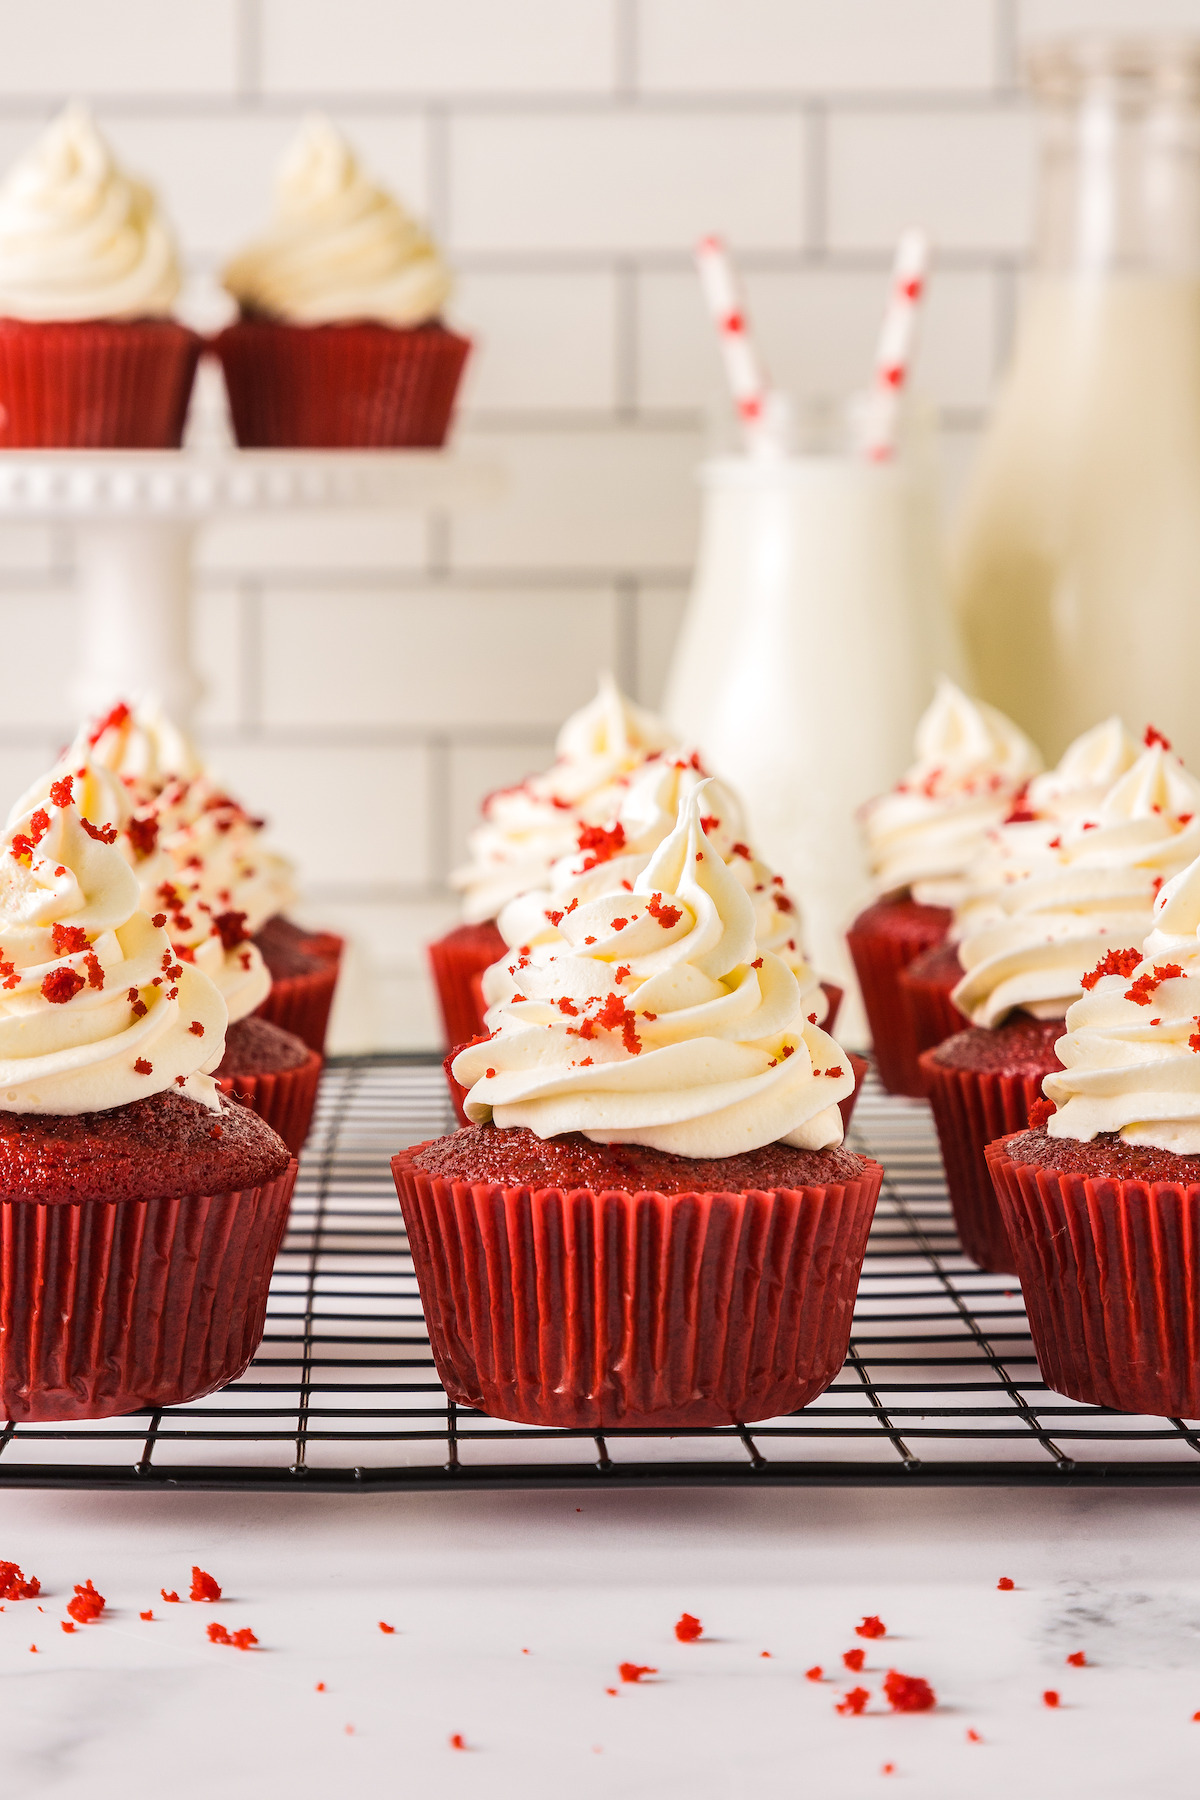 Red velvet cupcakes with cream cheese frosting on top.